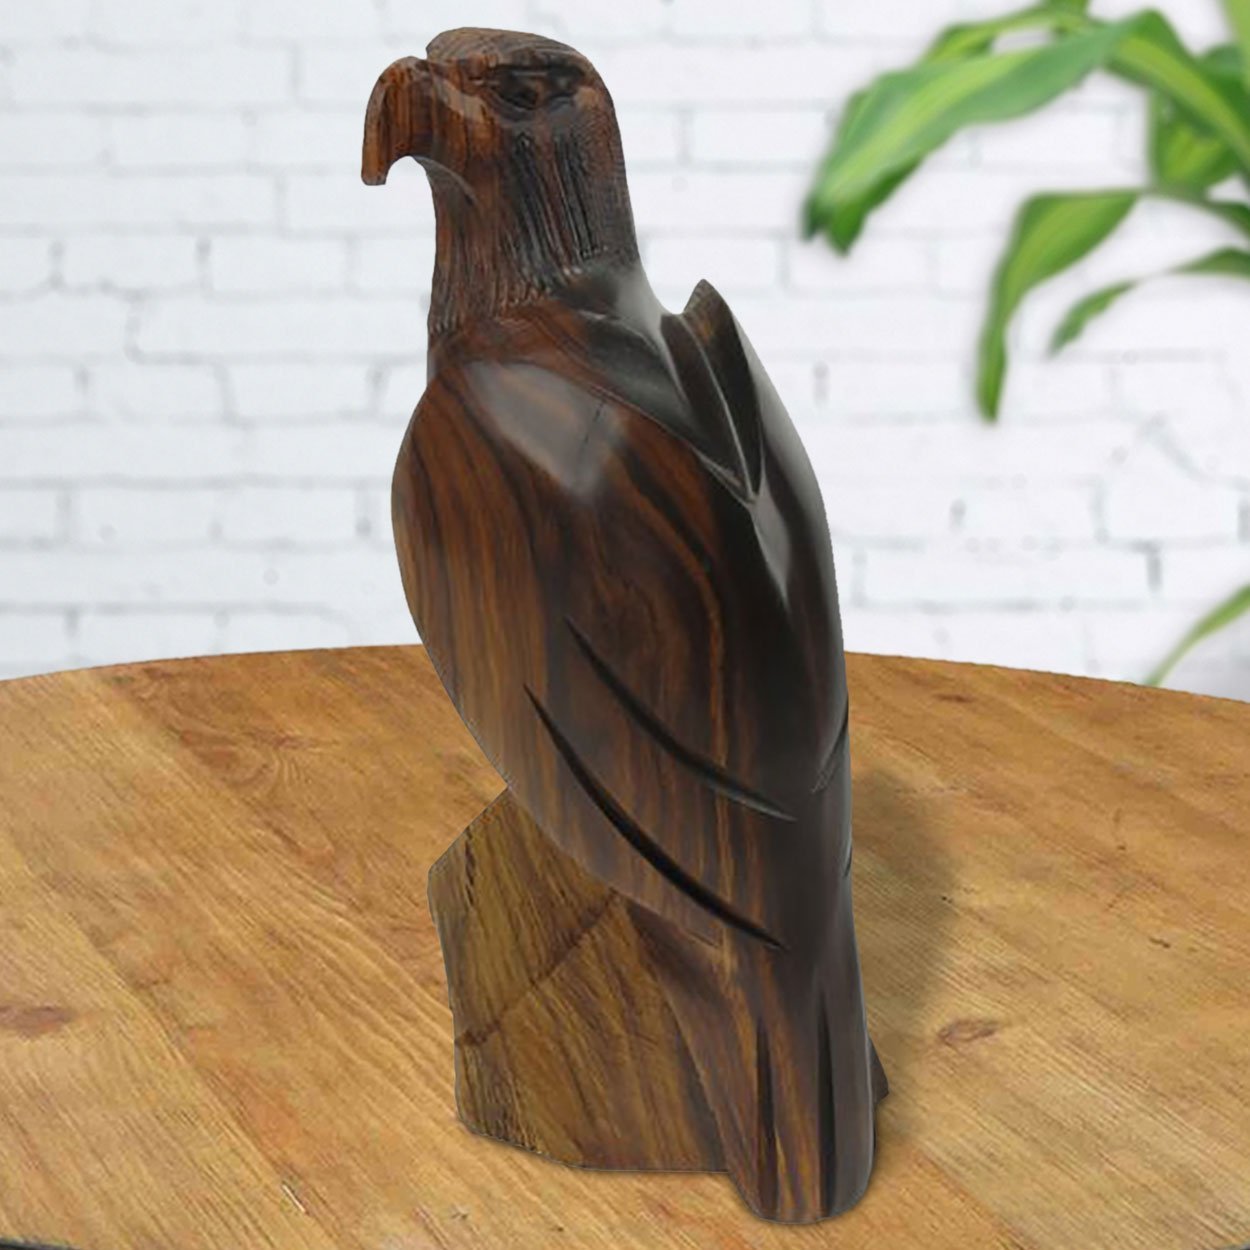 172130 - 9in Tall Eagle Ironwood Carving